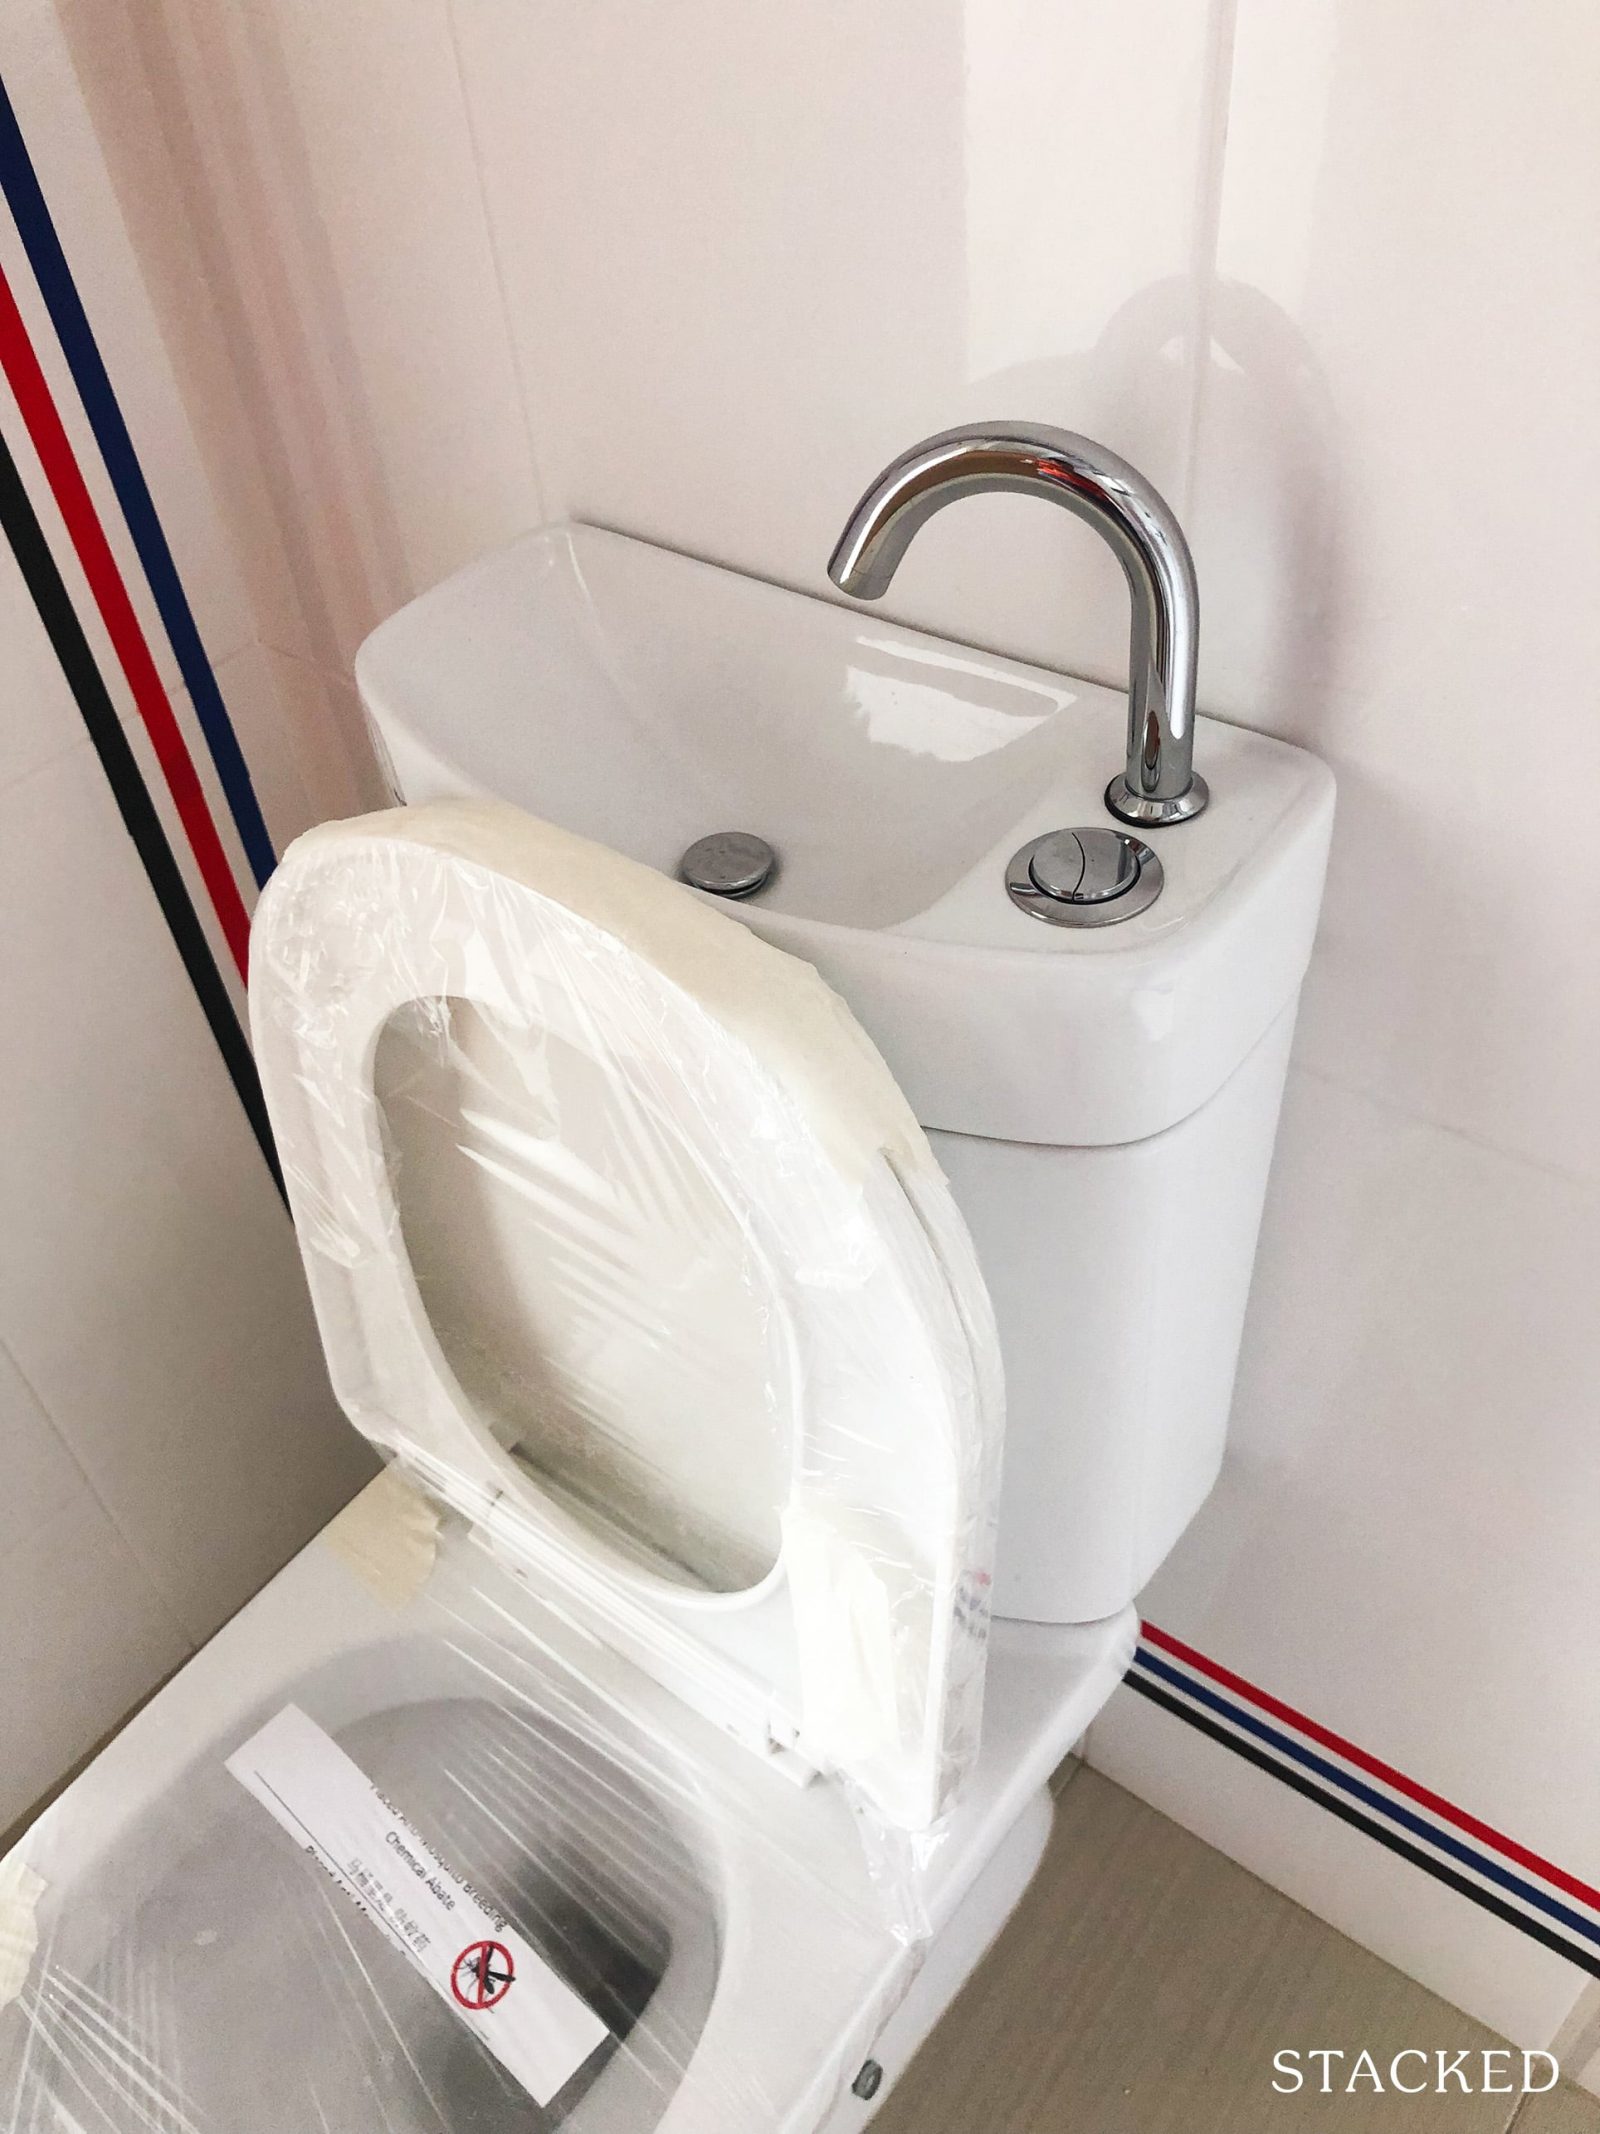 bto defects toilet